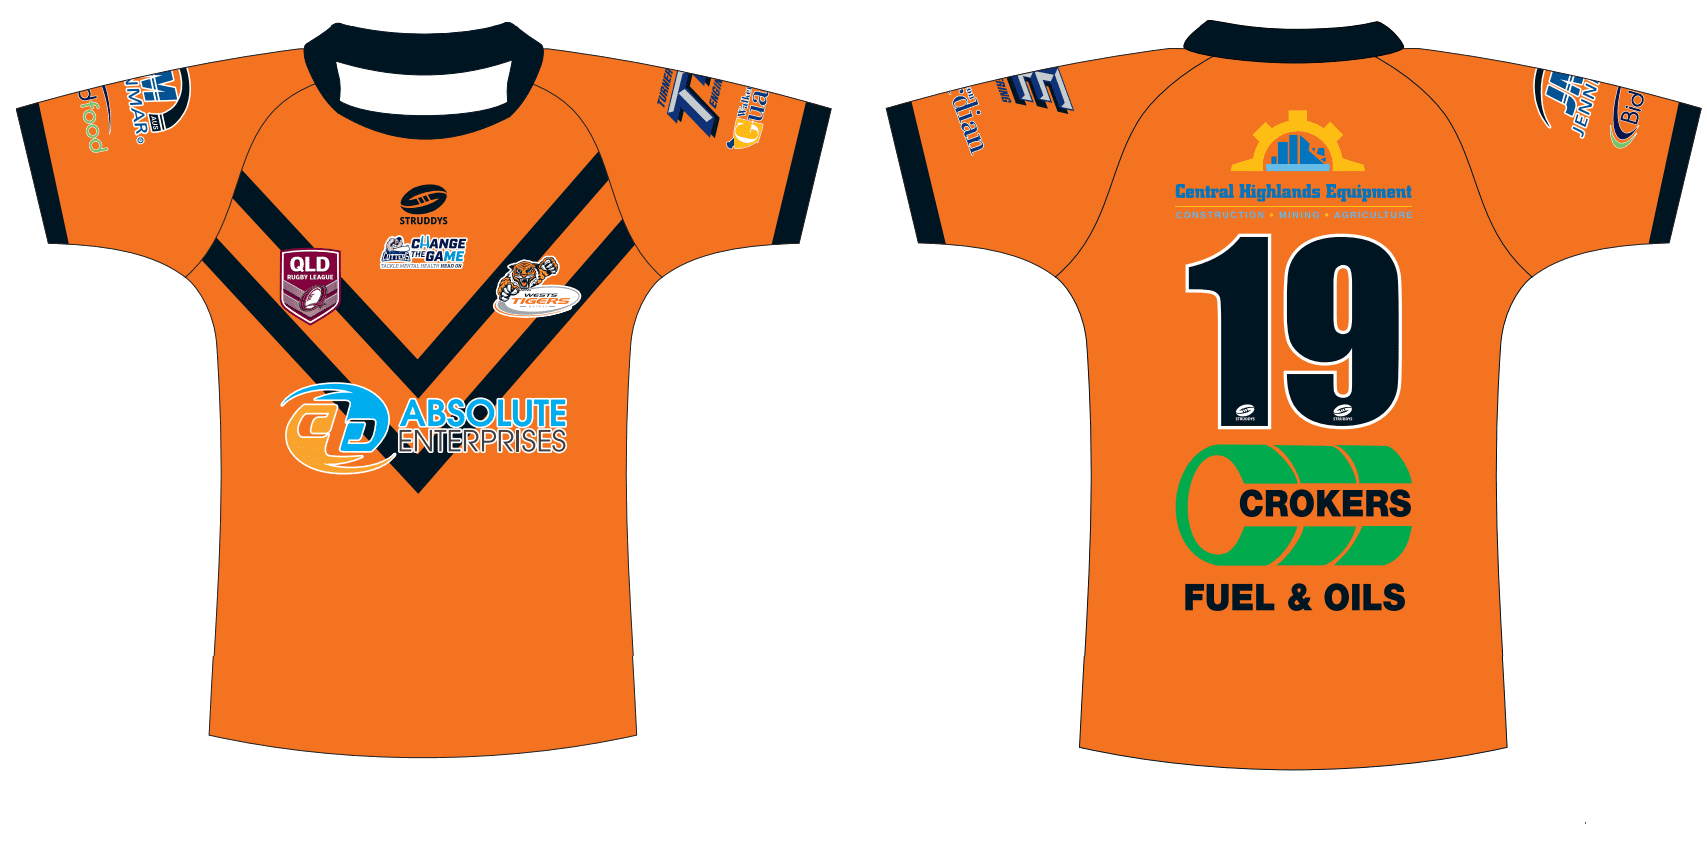 Proud Supporters of West Tigers Mackay – Absolute Enterprises